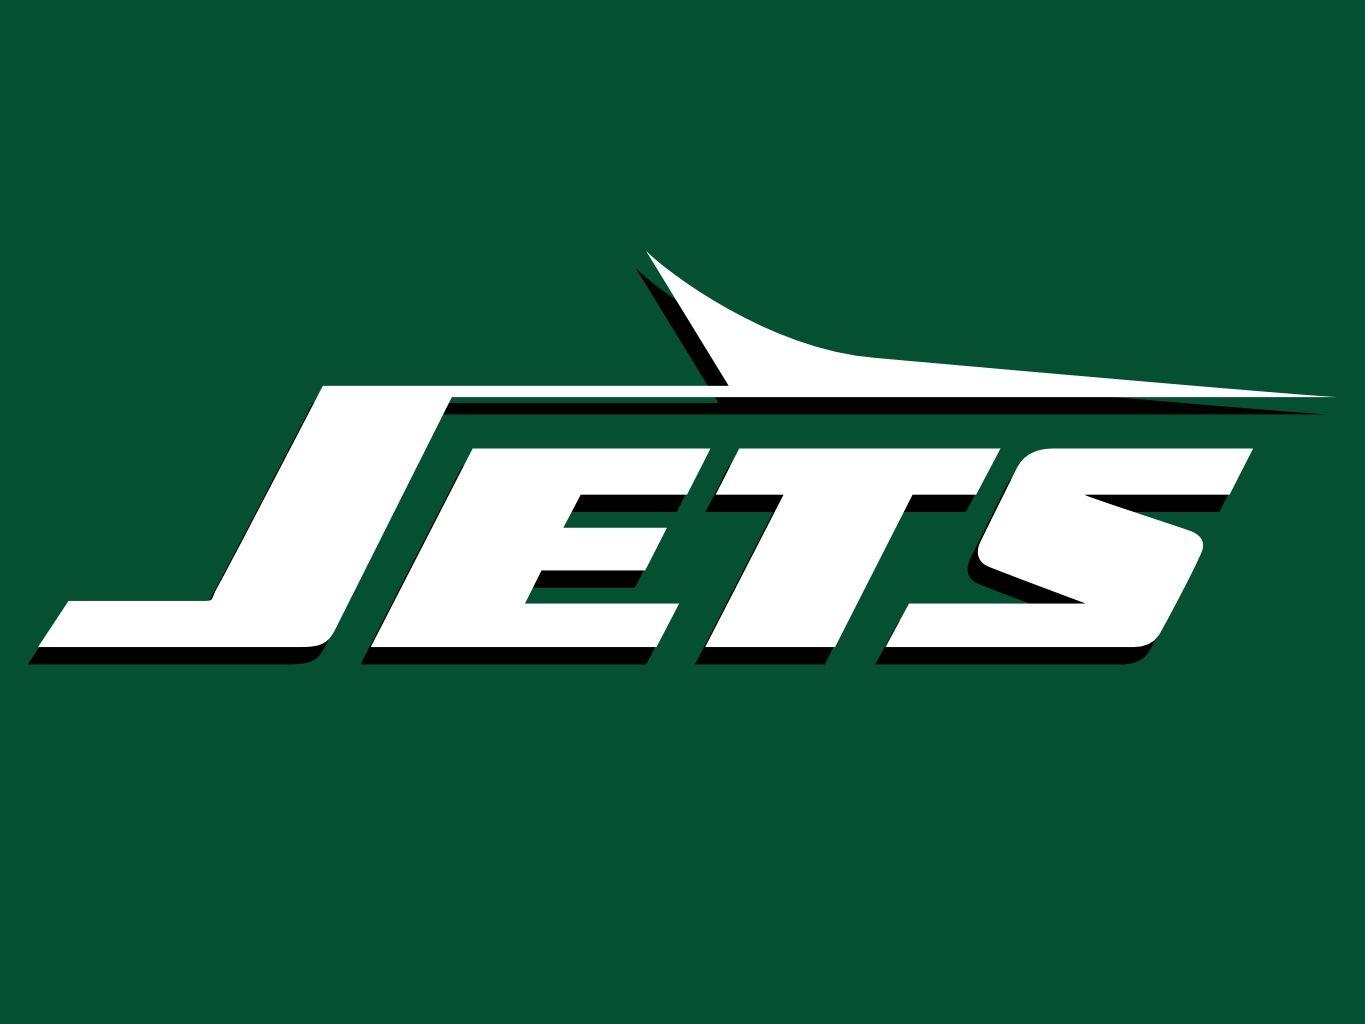 New York Jets New Logo - It's time for a logo and uniform change. - New York Jets Message ...